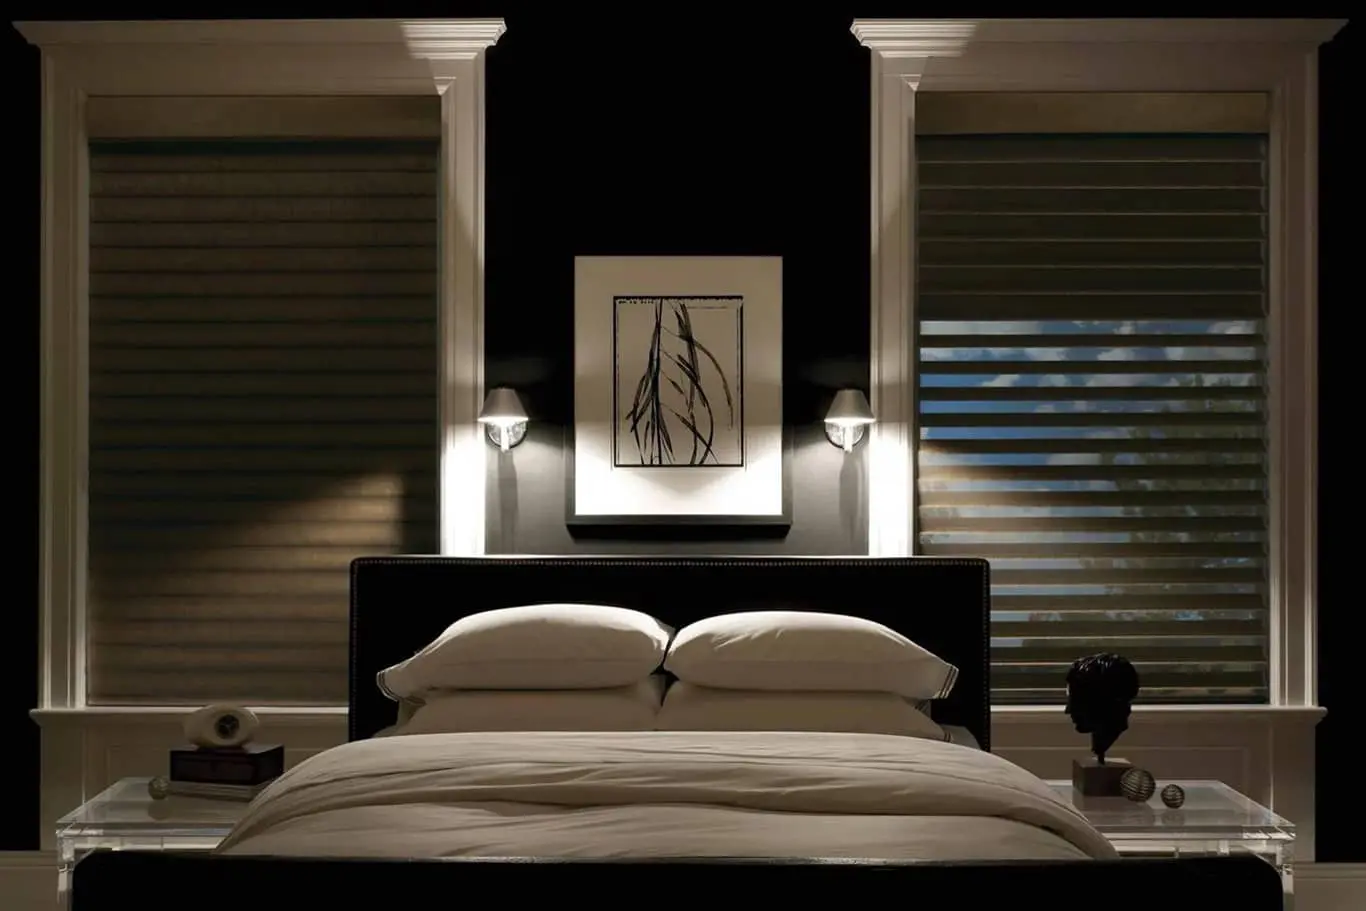 blackout shades in a bedroom